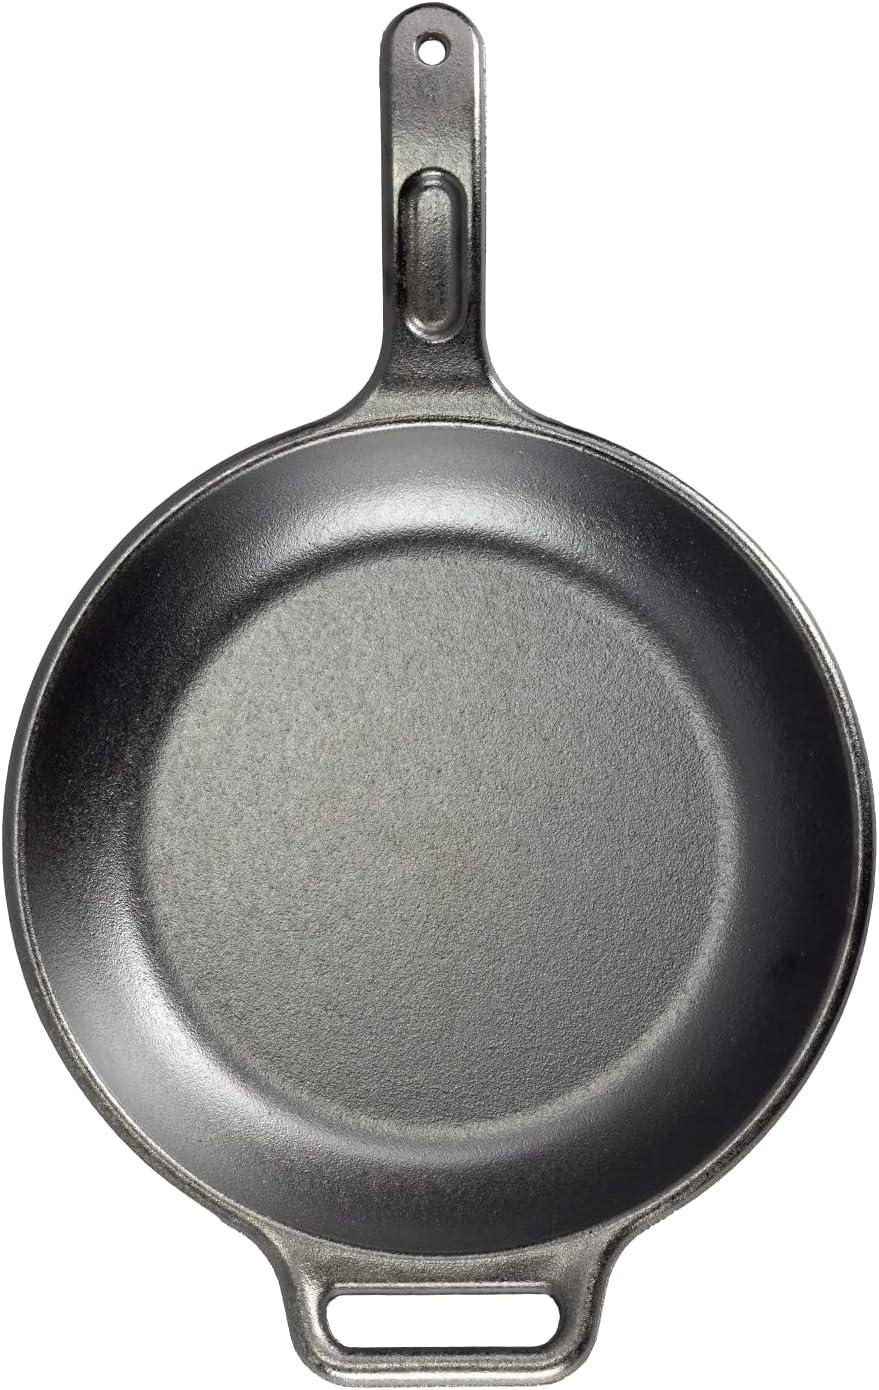  Lodge BOLD 12 Inch Seasoned Cast Iron Grill Pan with